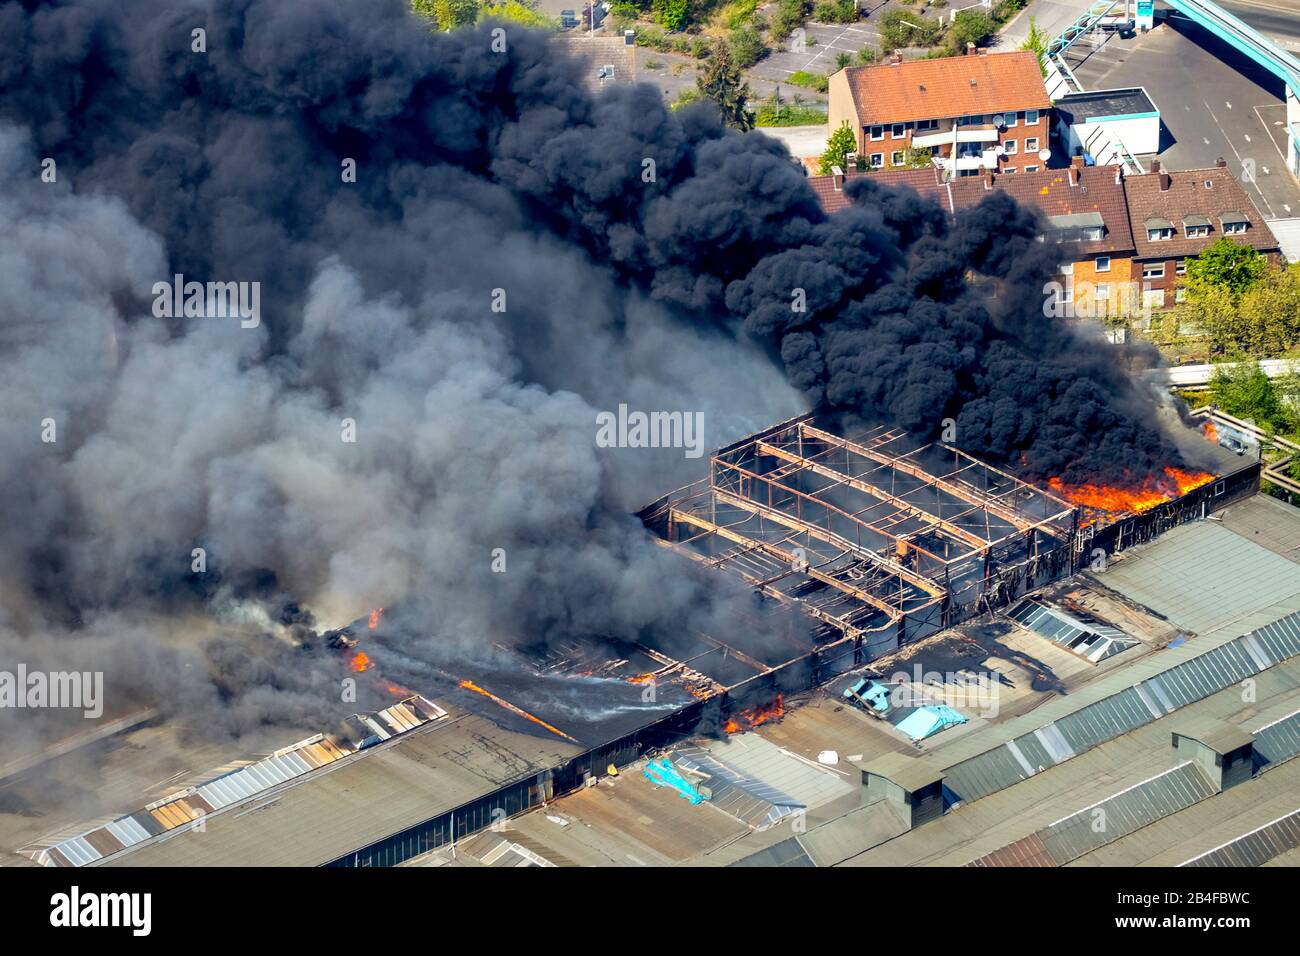 Aerial view of the fire at WDI in Hamm on Wilhelmstrasse. At Wilhelmstrasse,  a WDI hall has been burning since about 12 o'clock. Since 2:25 pm, houses  have been evacuated in the